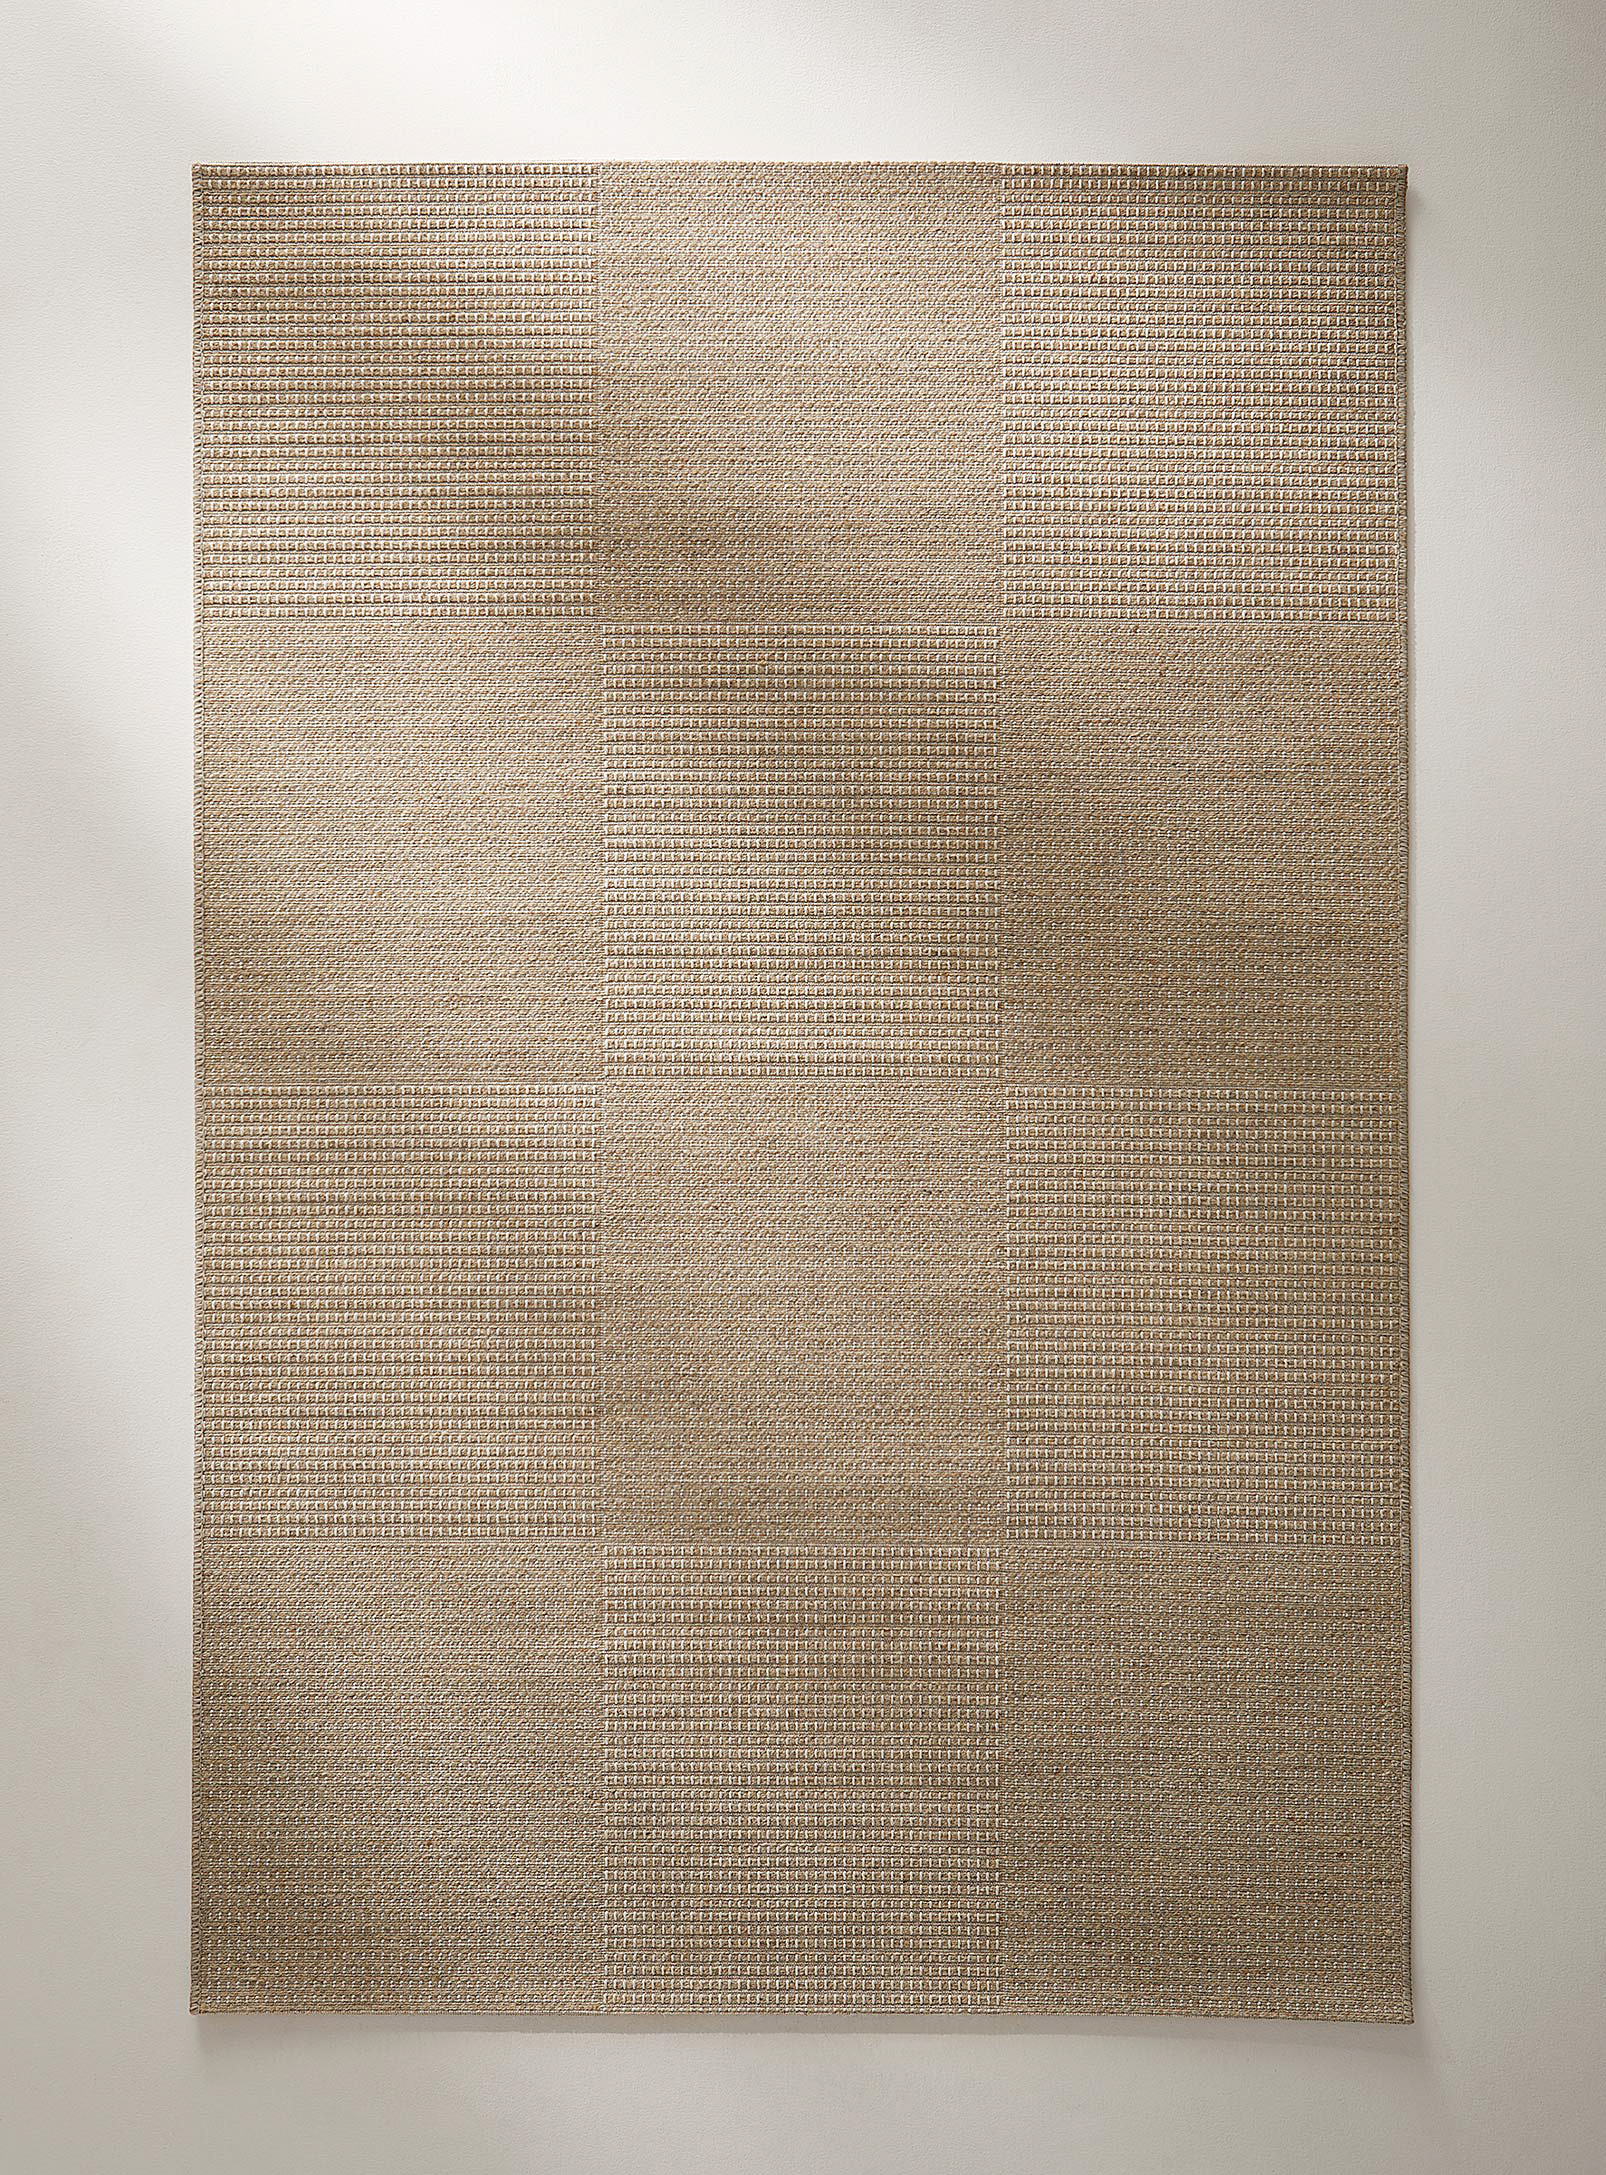 Simons Maison - Neutral checkers rug See available sizes